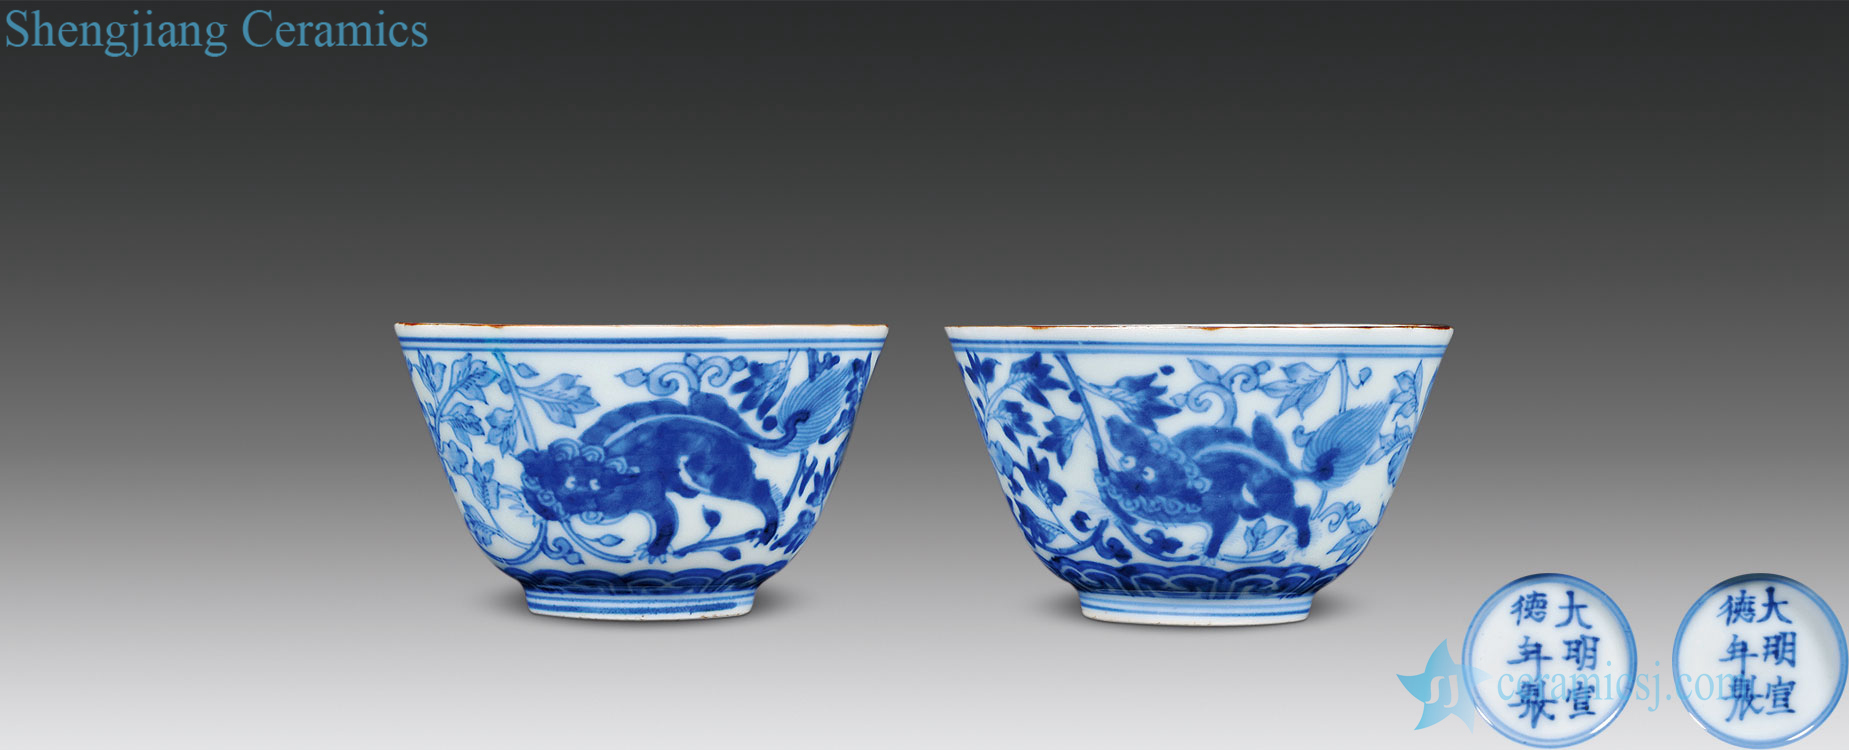 In the early qing Blue and white floral lion grain cup (a)